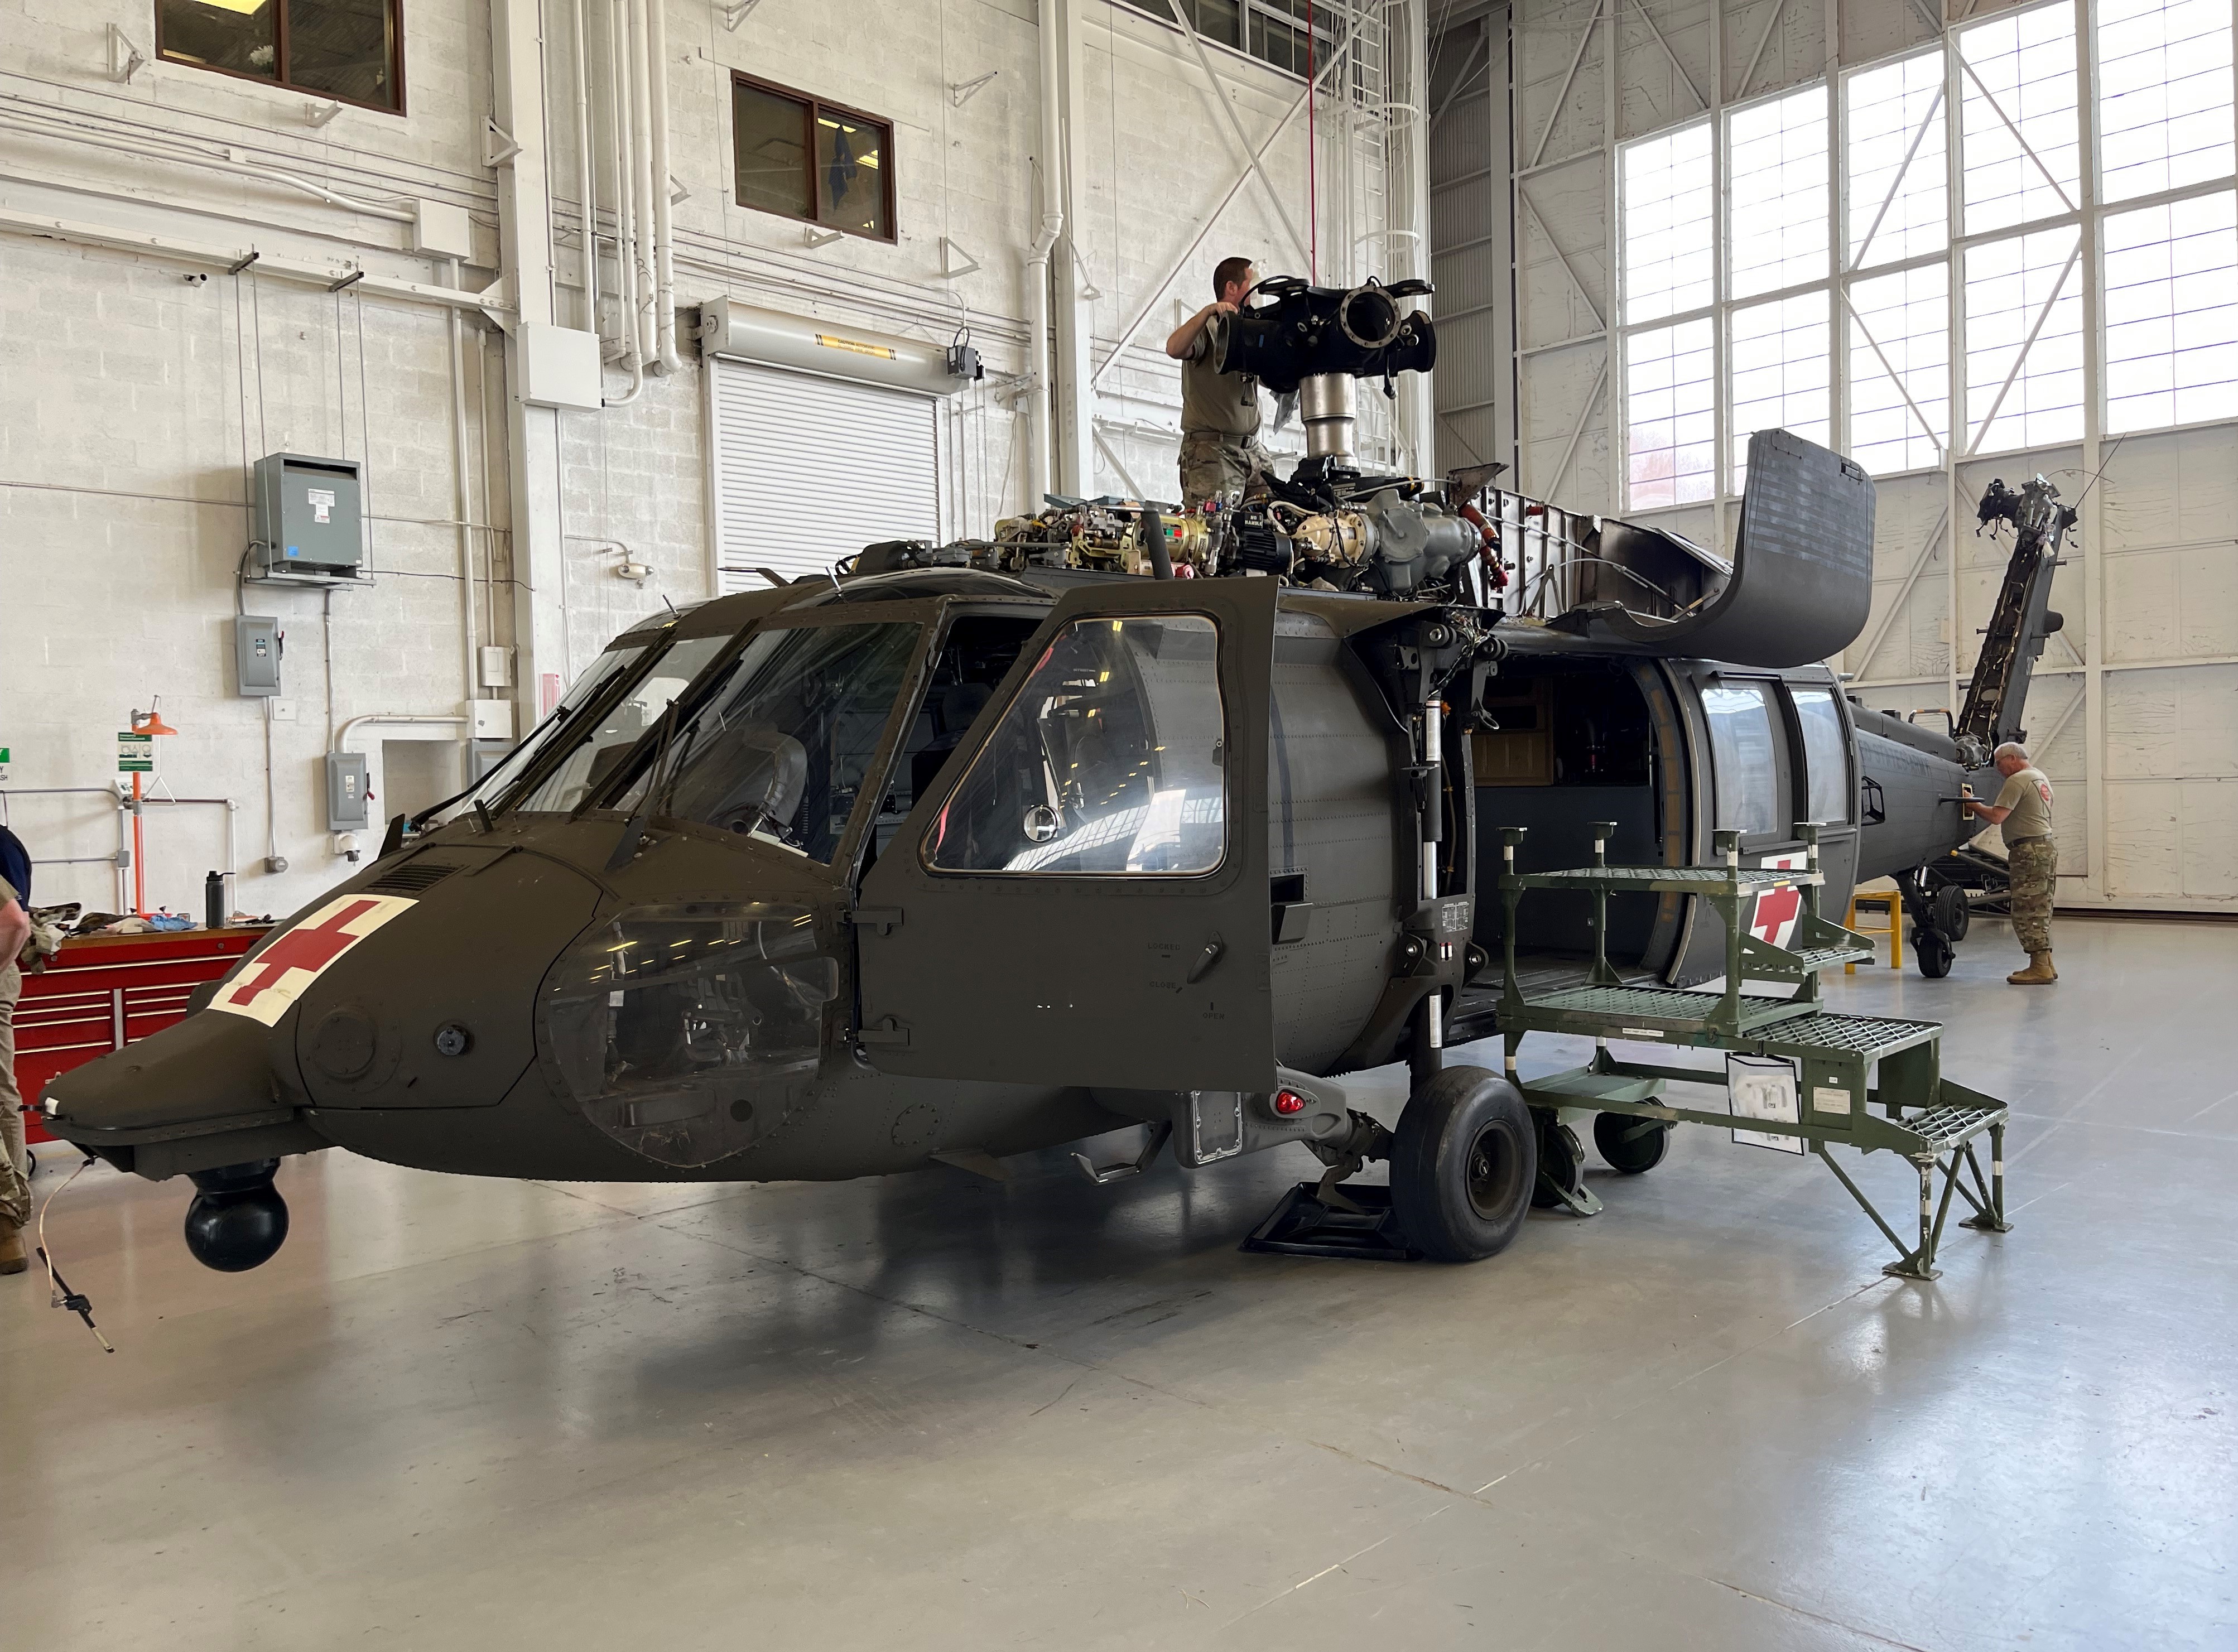 GTRI hosted a collaborative event with the Georgia Army National Guard (GAANG) to develop solutions to improve aircraft maintenance.